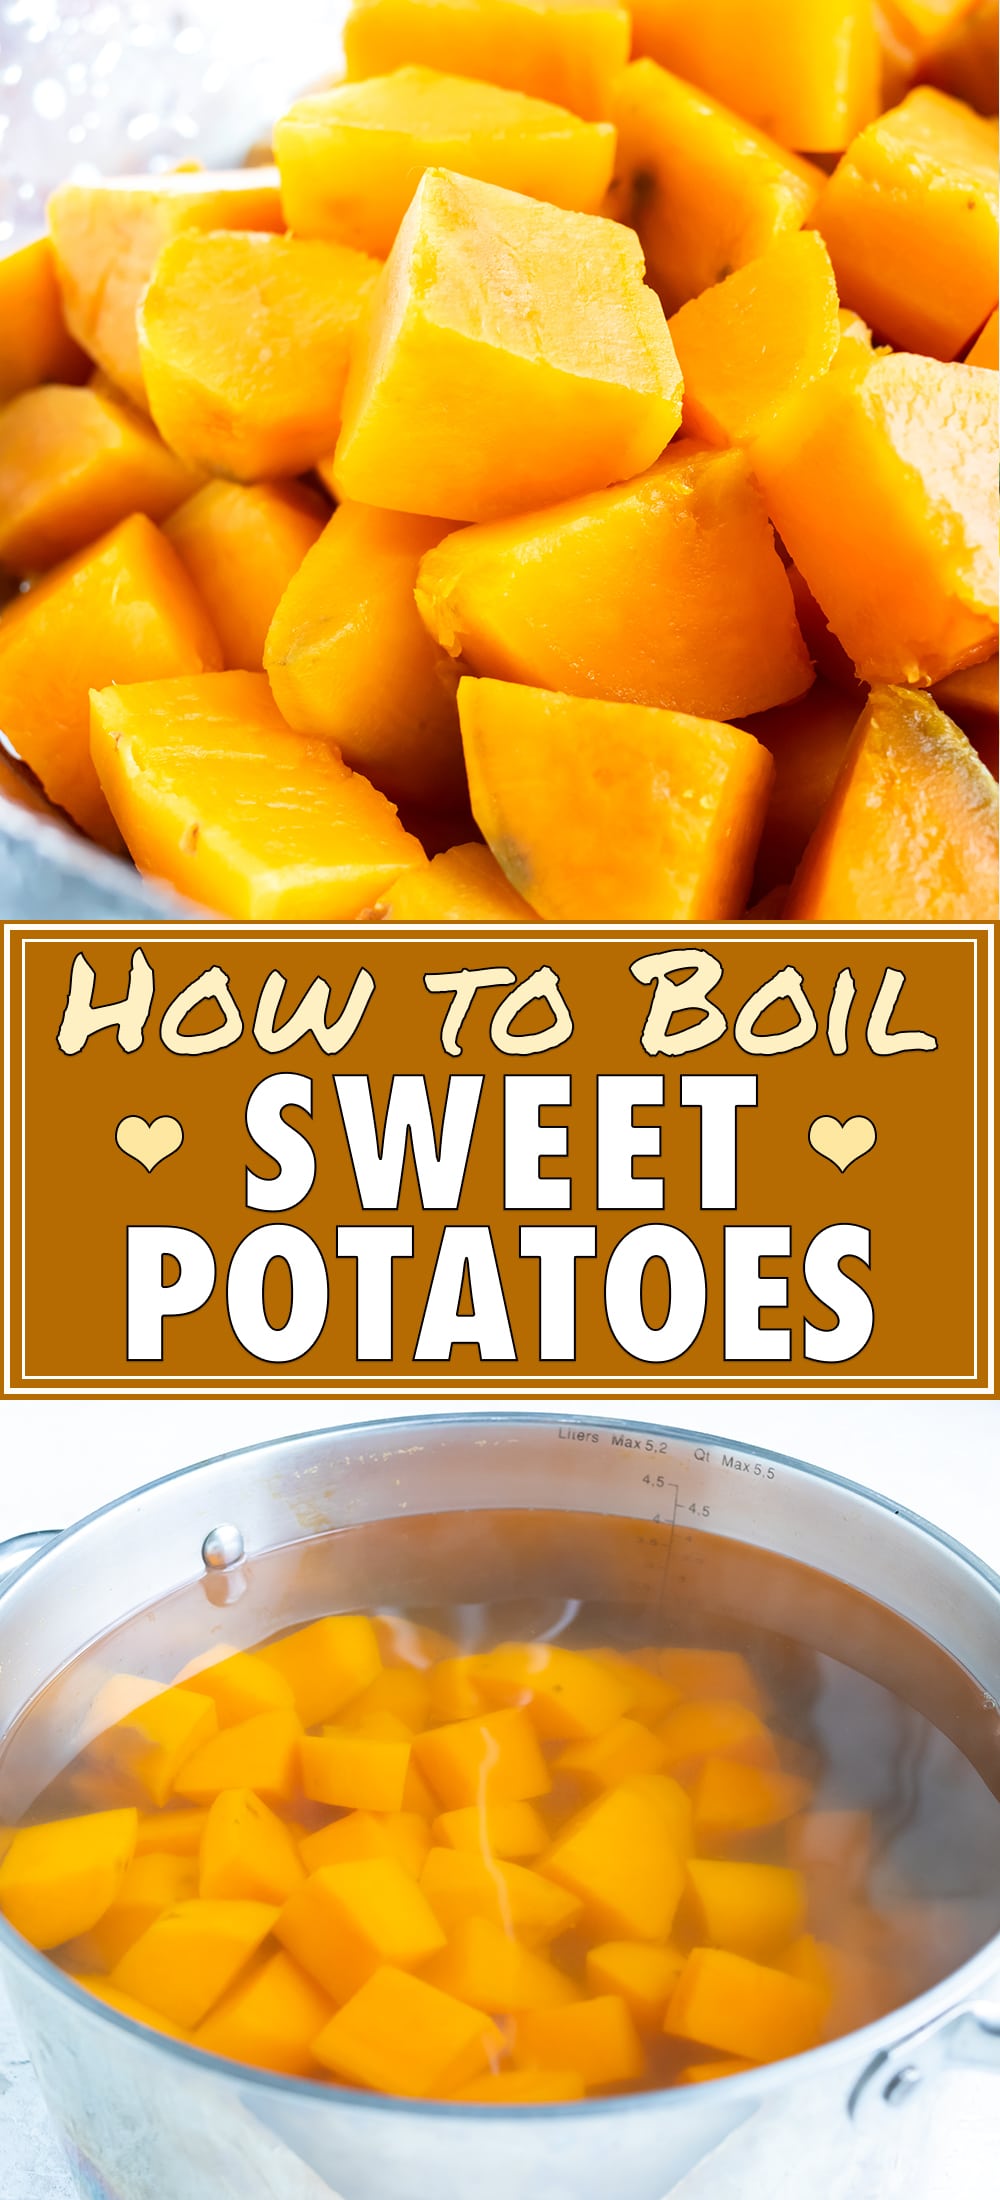 How To Boil Sweet Potatoes Pinterest 2 A 